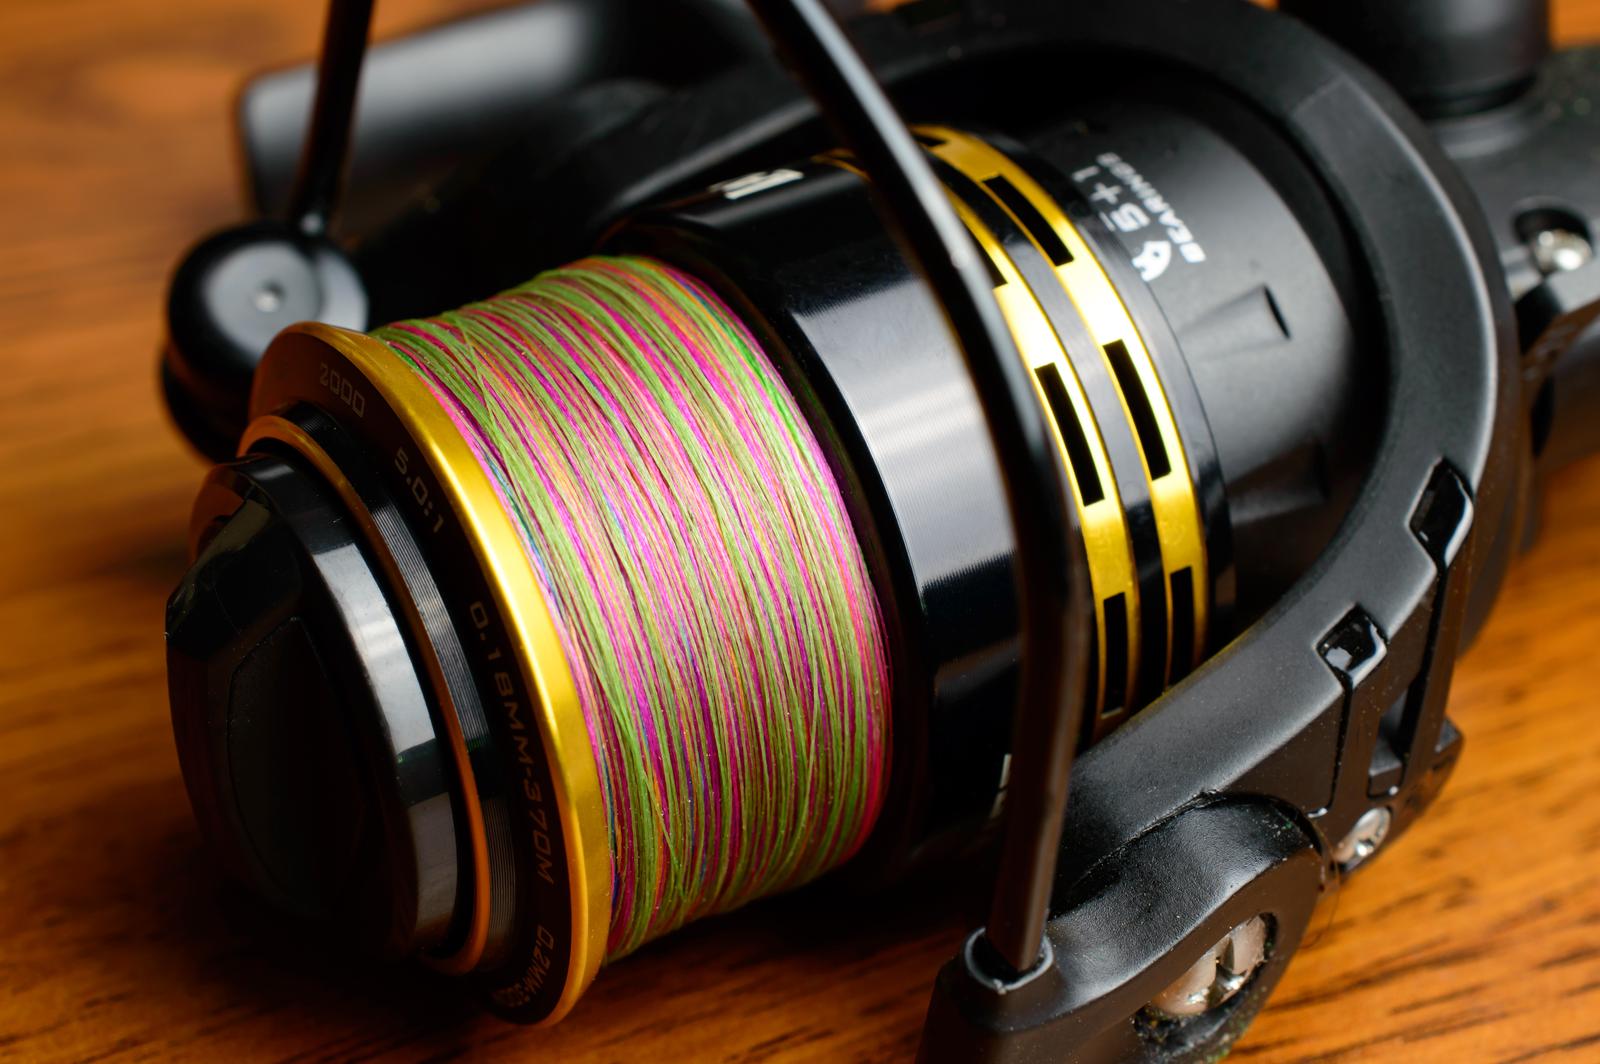 Fishing Reel With Colorful Line.